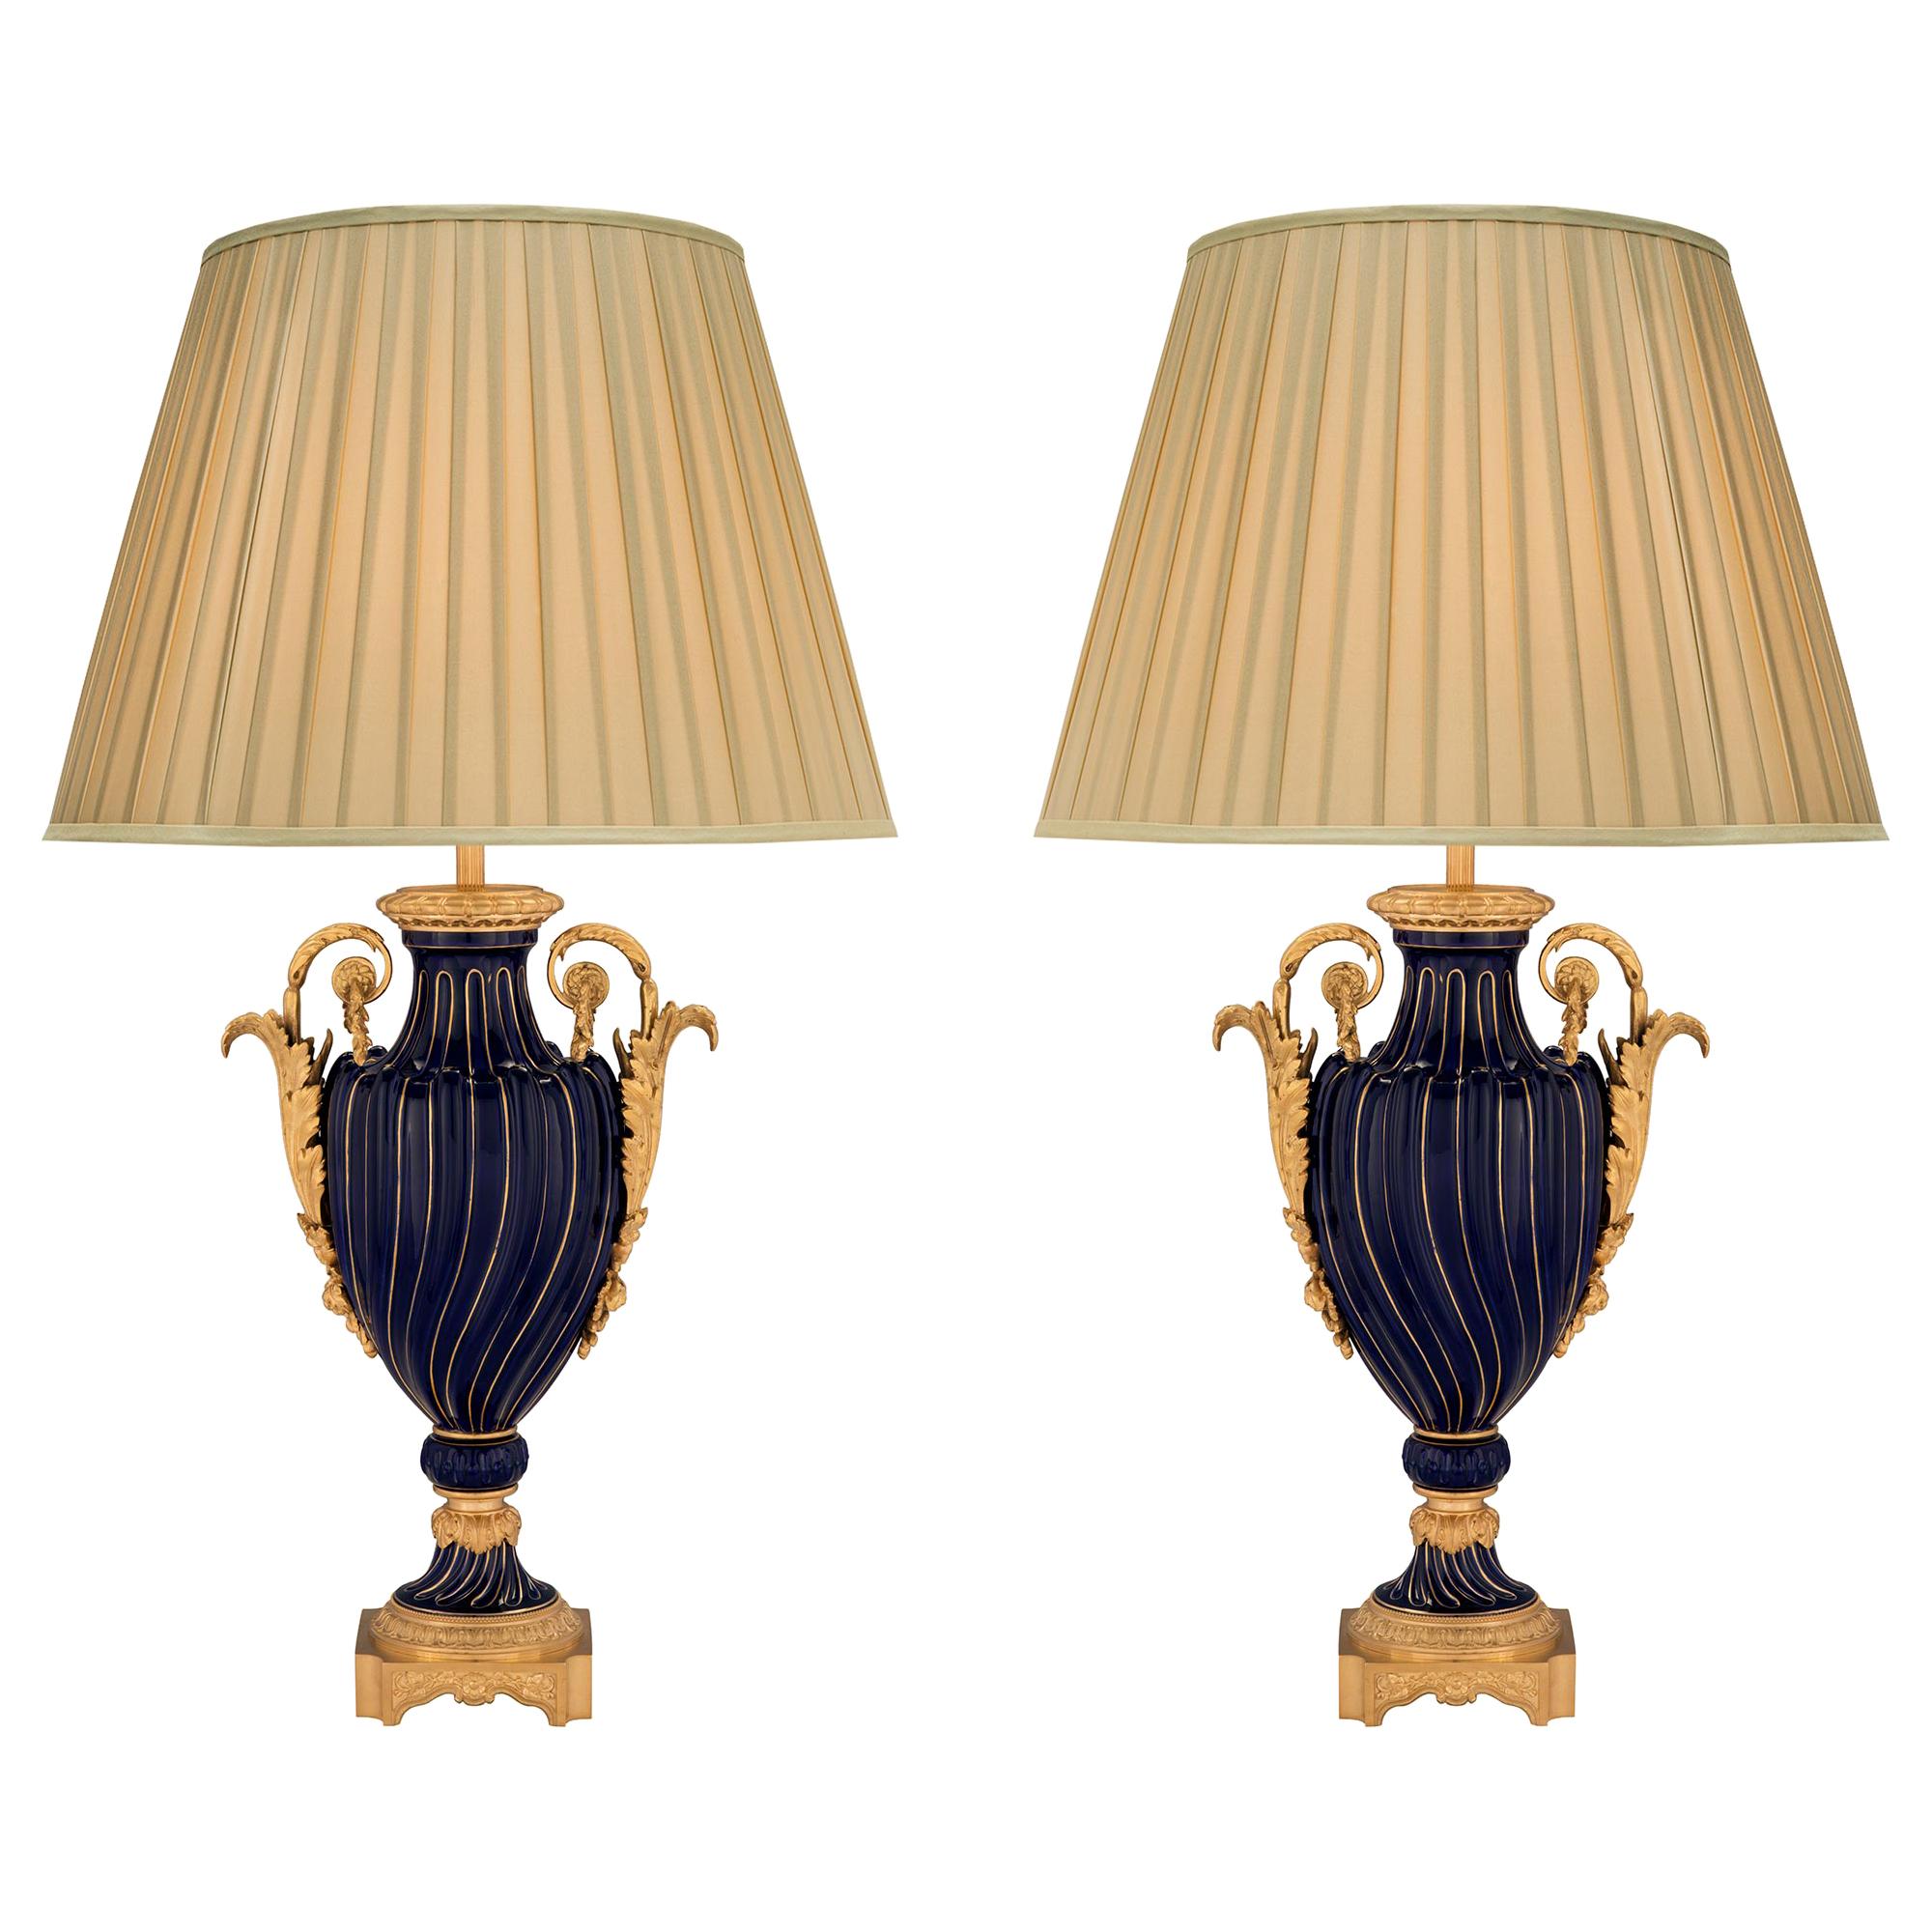 Pair of French 19th Century Sèvres Porcelain and Ormolu Mounted Lamps For Sale